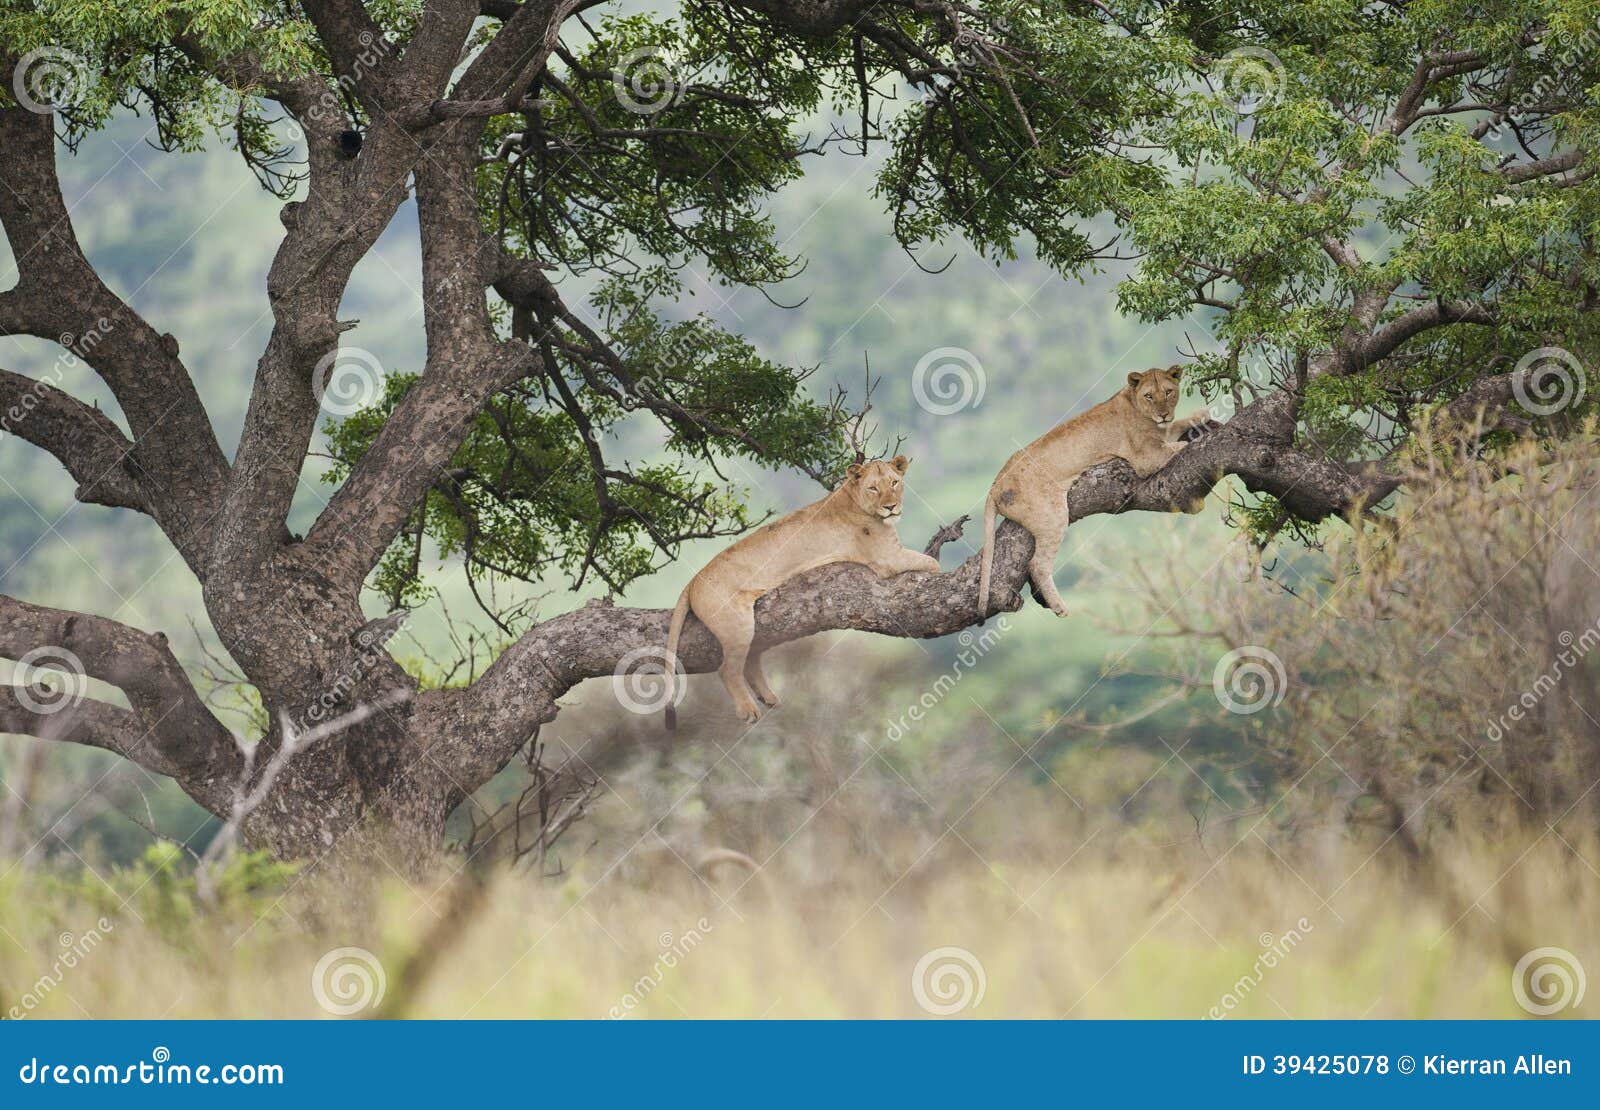 lions in tree south africa